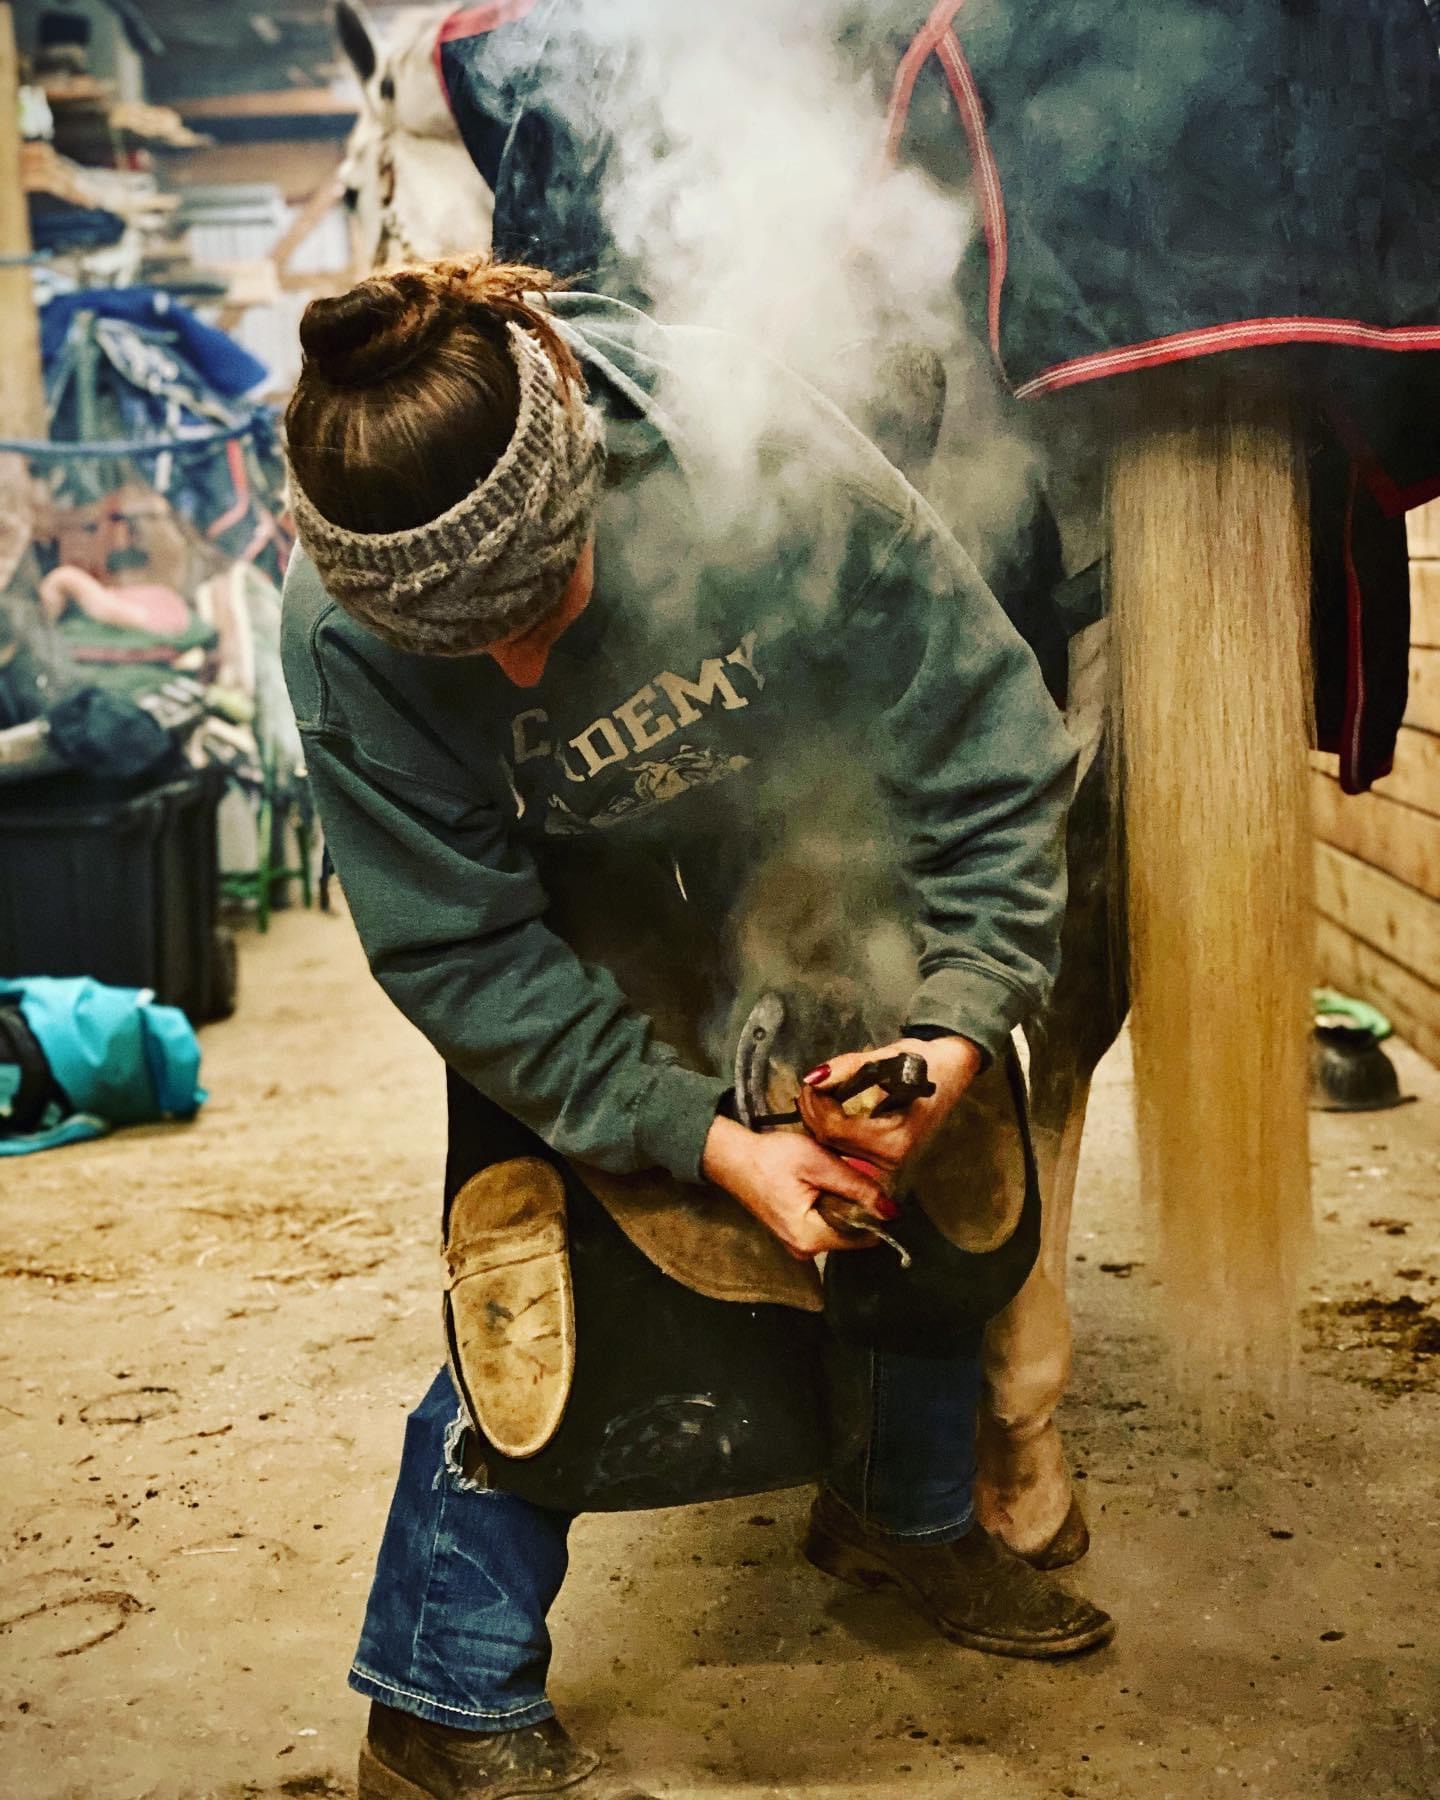 Sarah Coltrin has been a practicing farrier since her early 20s. Brooke Treichler Photo